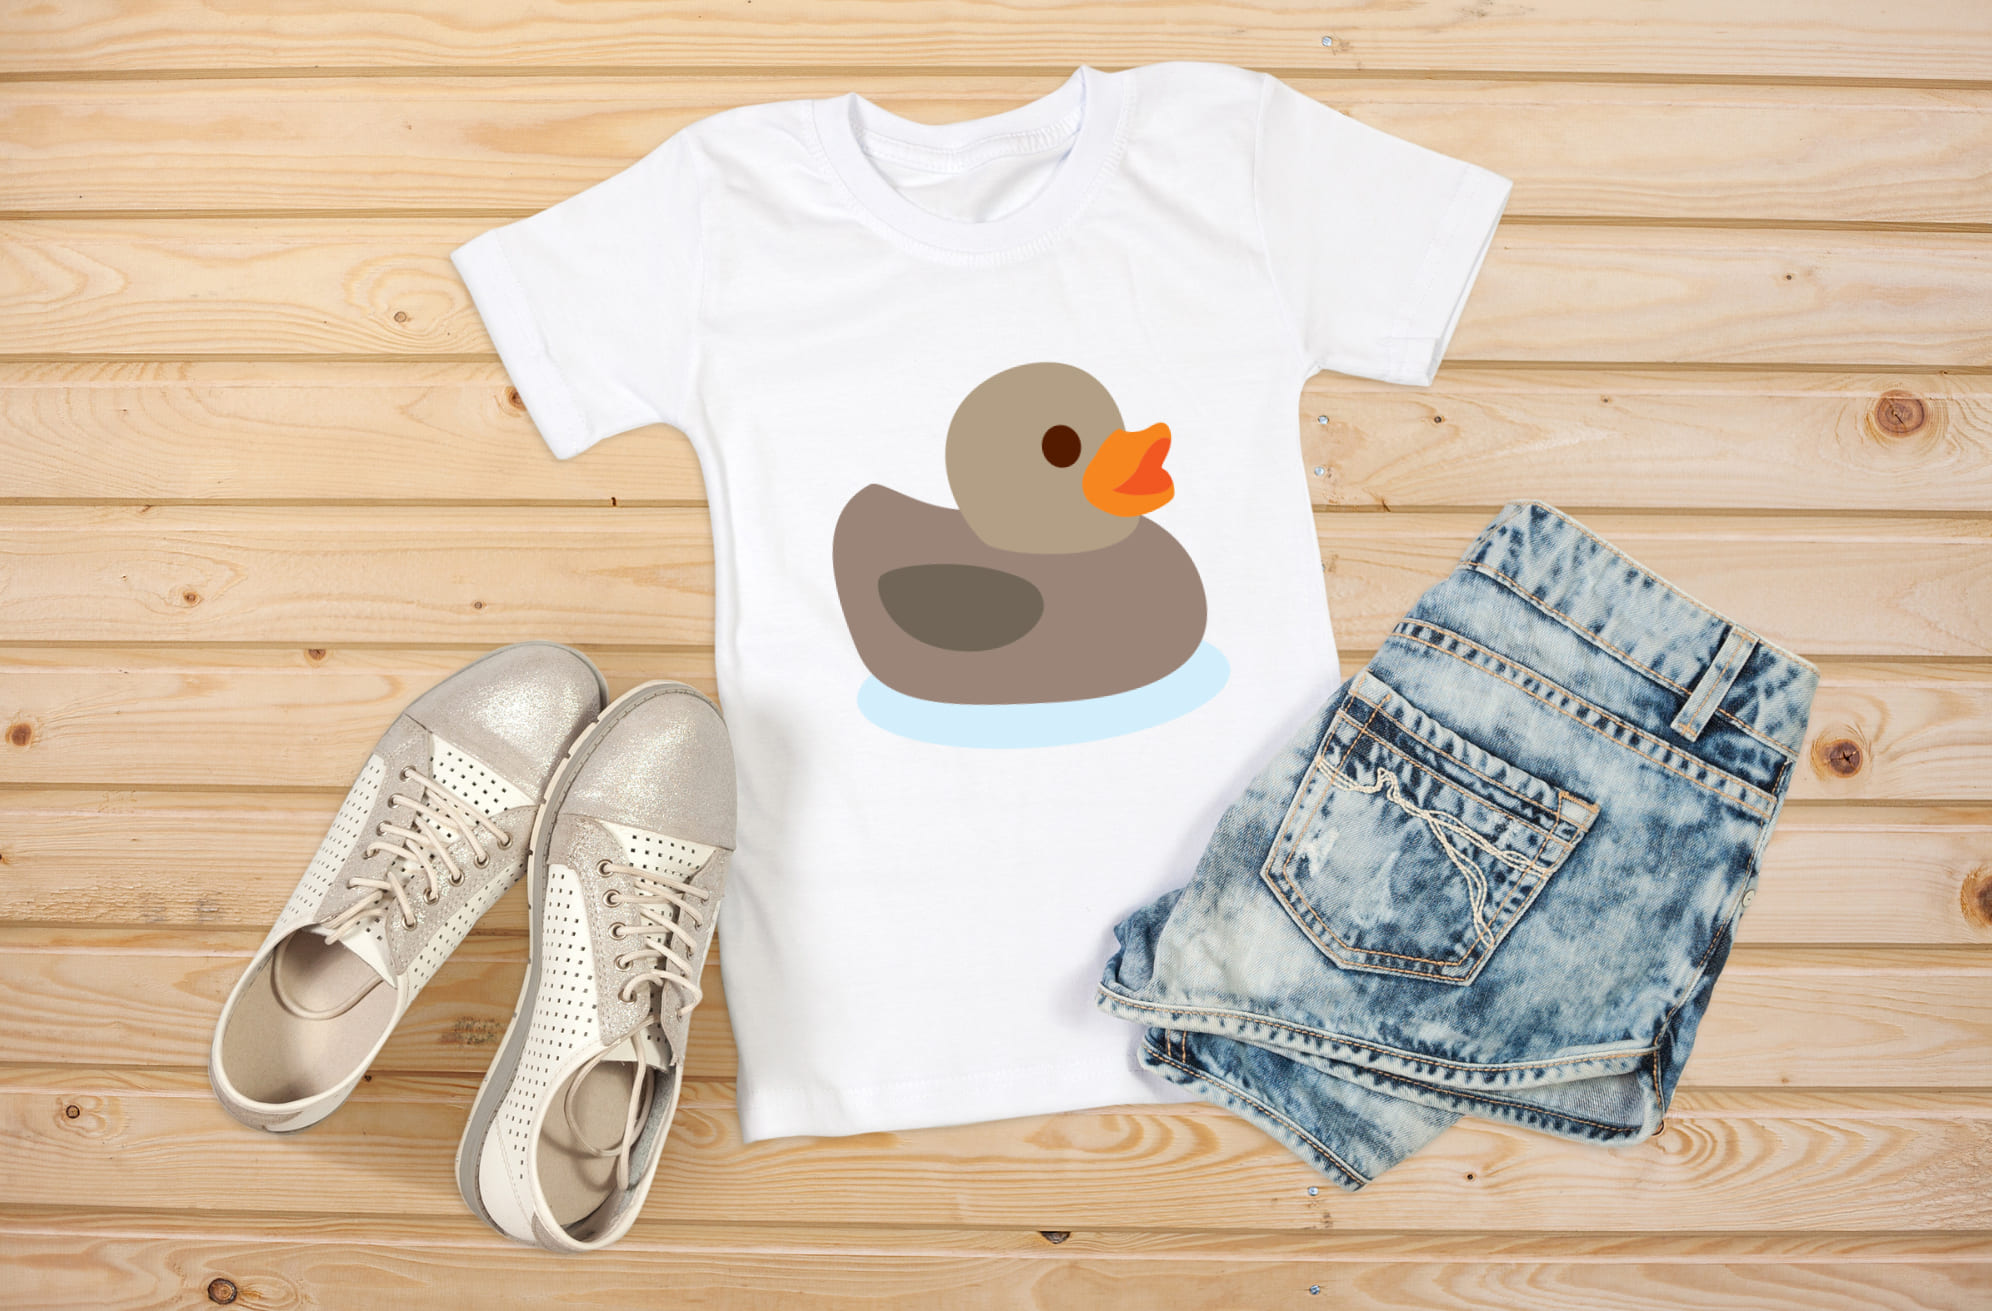 Picture of a white t-shirt with a unique rubber duck print in gray